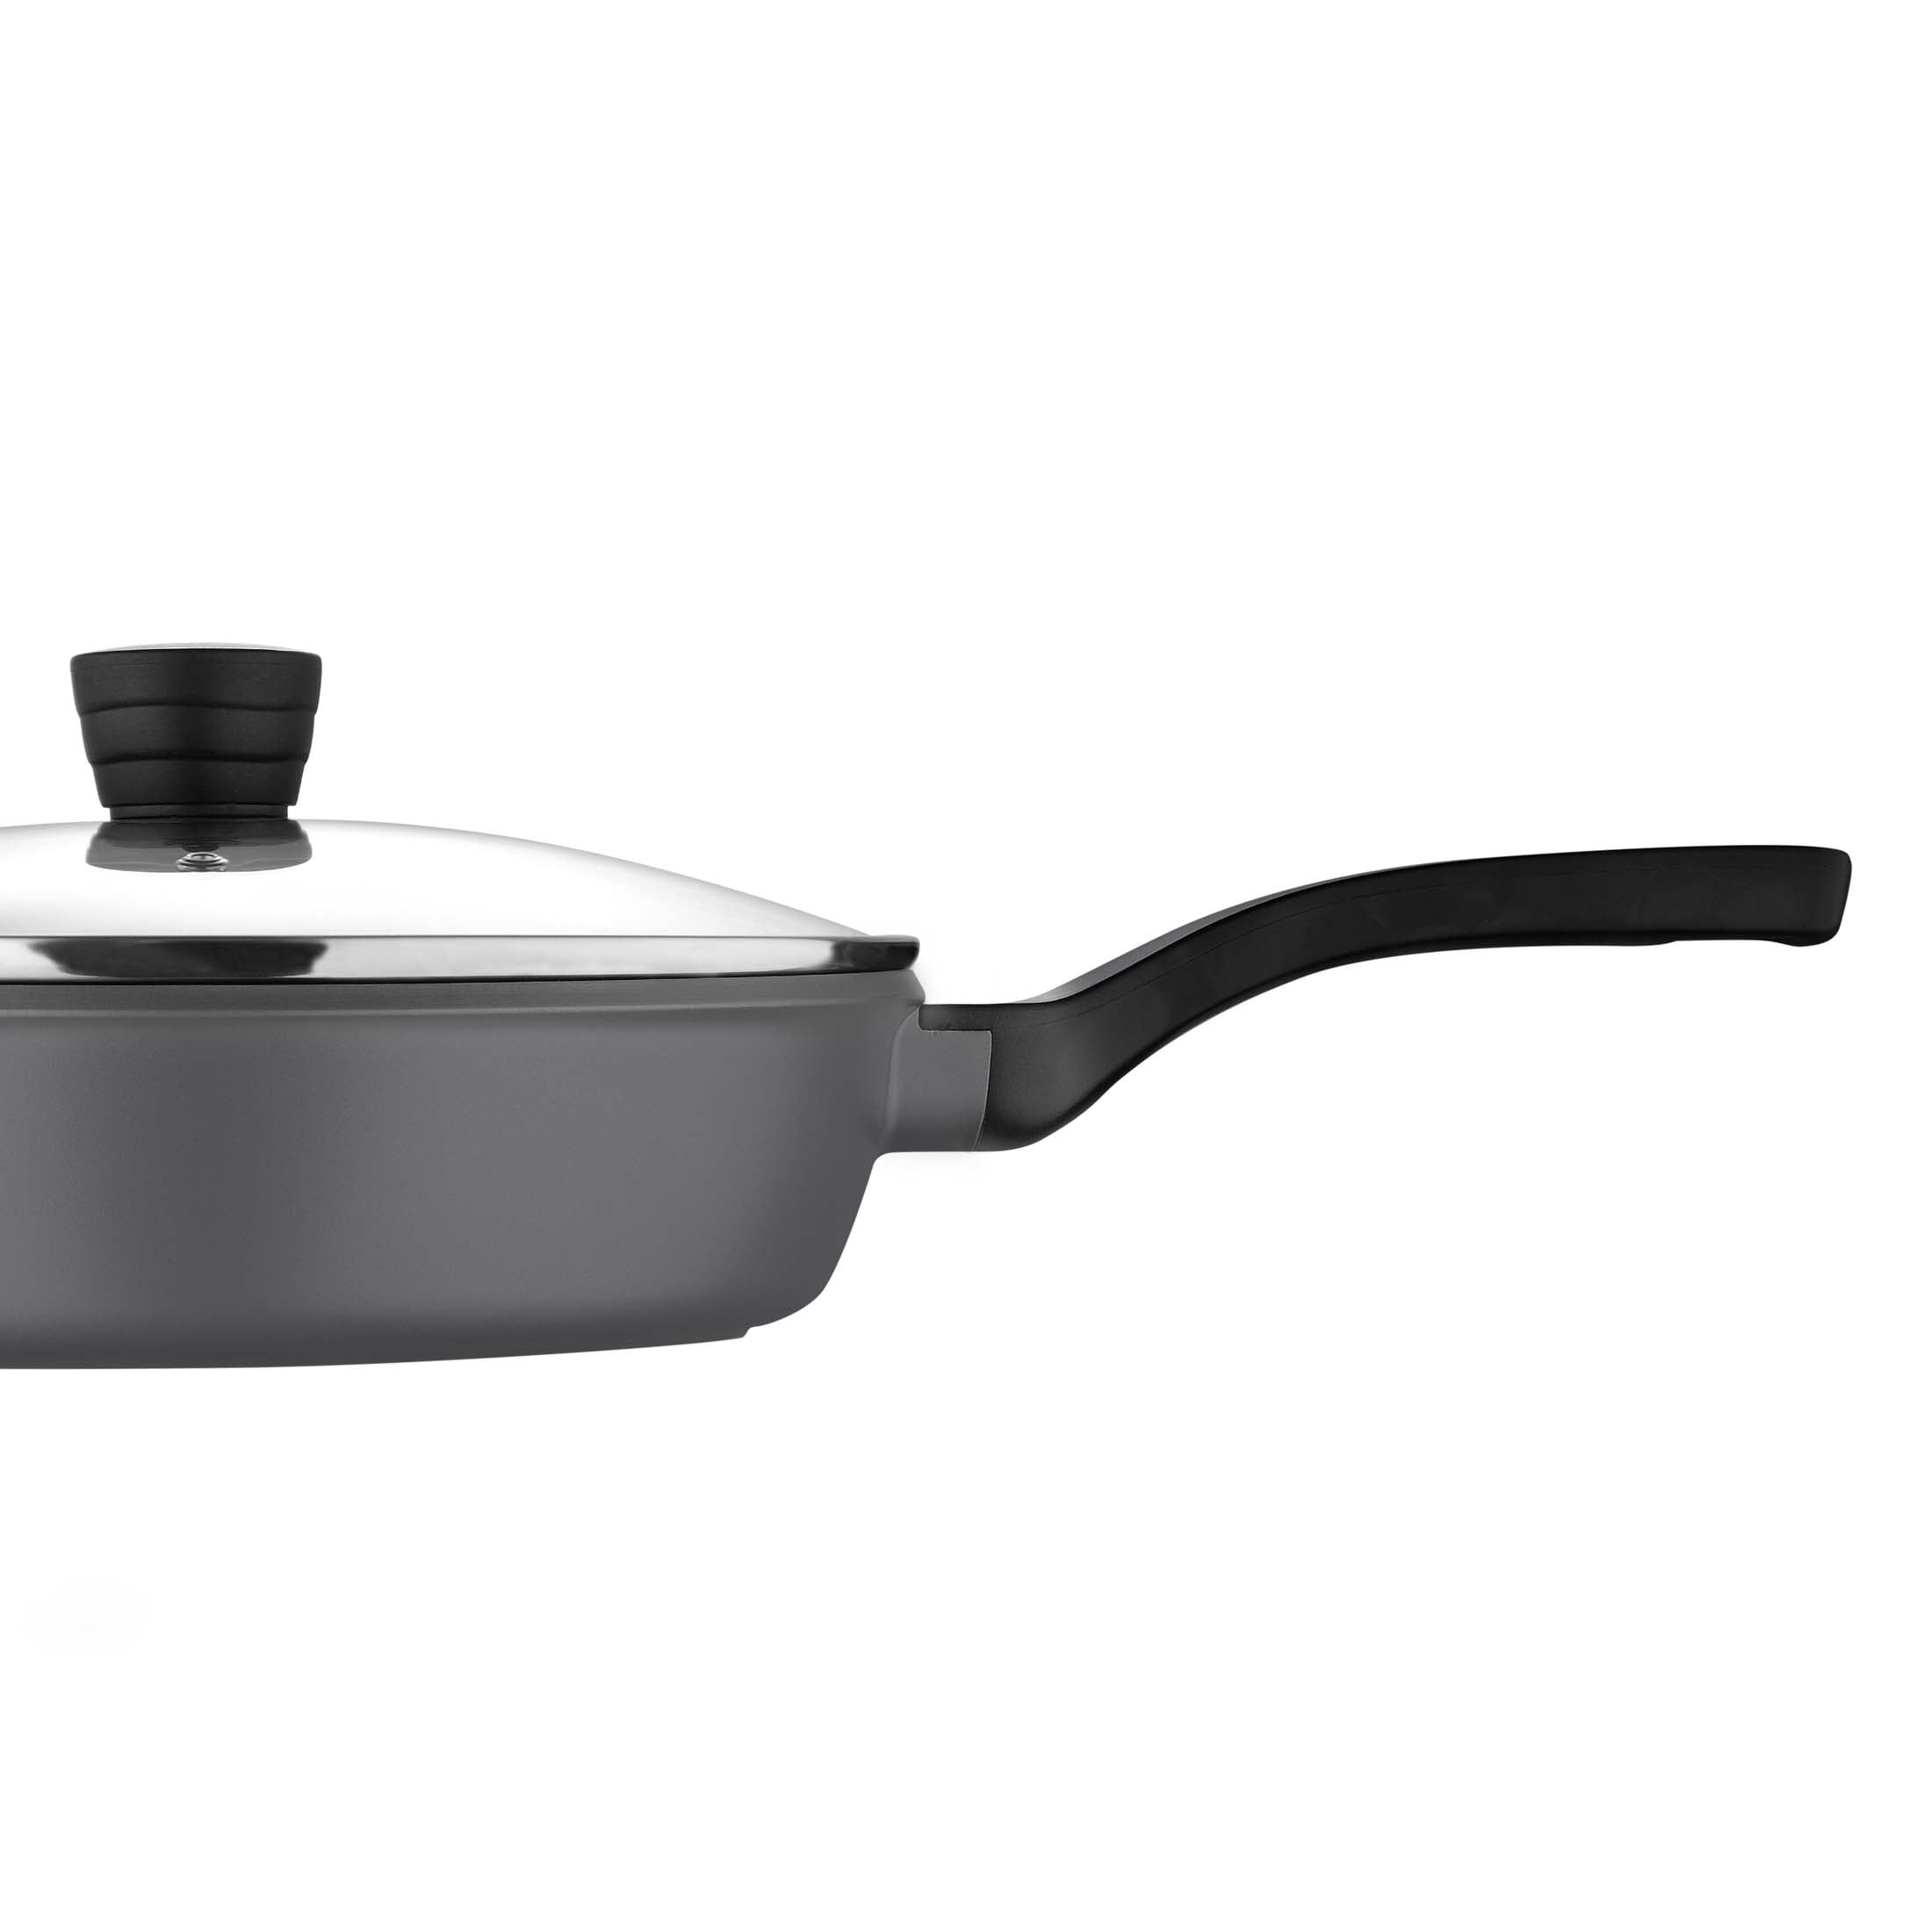 Bergner 5-Quart Saute Pan with Helper Handle Stainless Steel Dishwasher  Safe Induction Ready with Lid - On Sale - Bed Bath & Beyond - 35727693